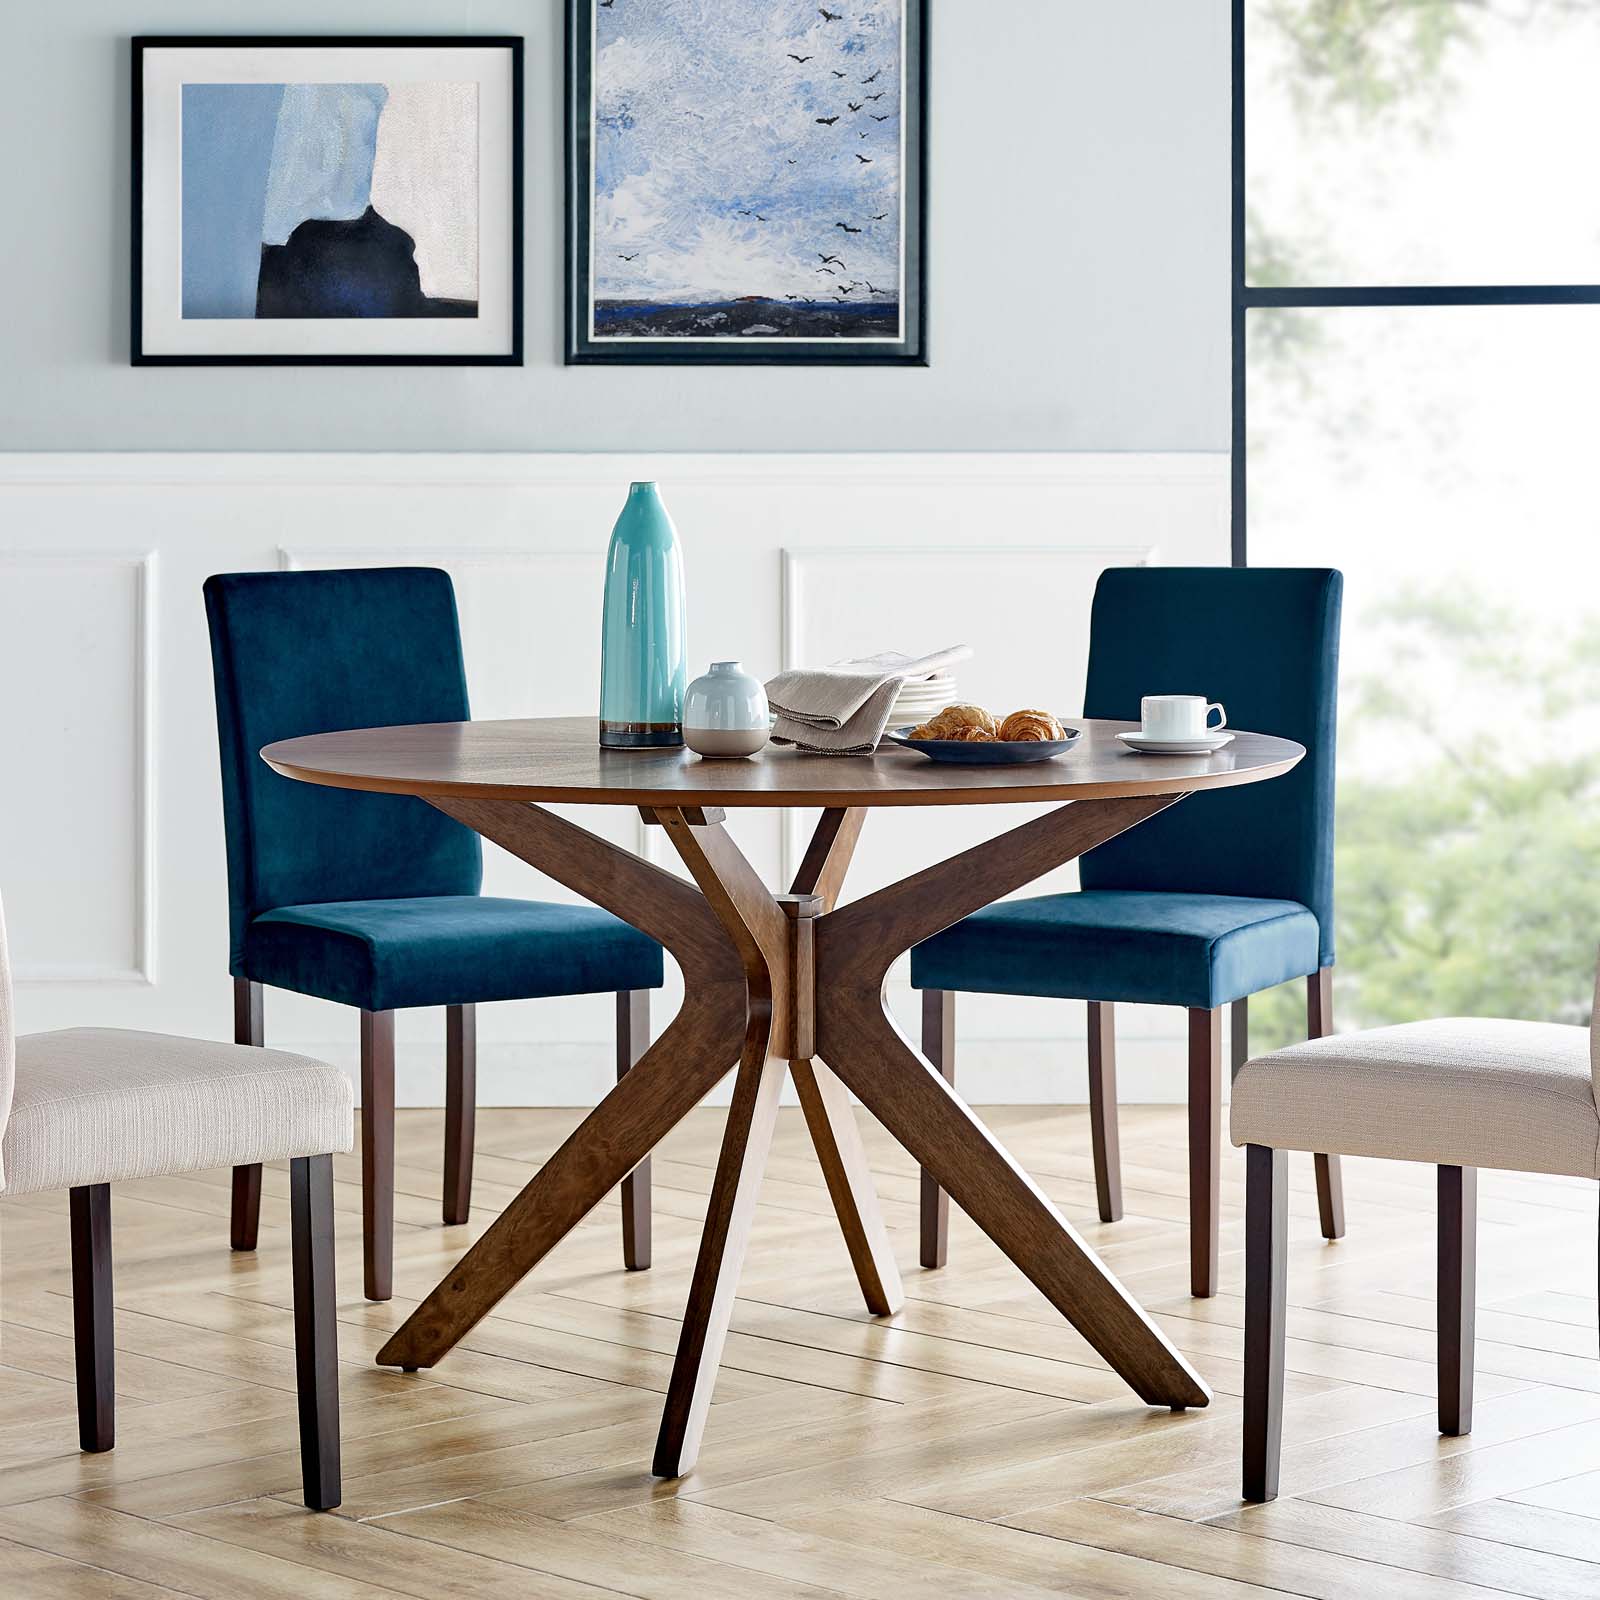 Modterior :: Dining Room :: Dining Tables :: Crossroads 47 Inch Round